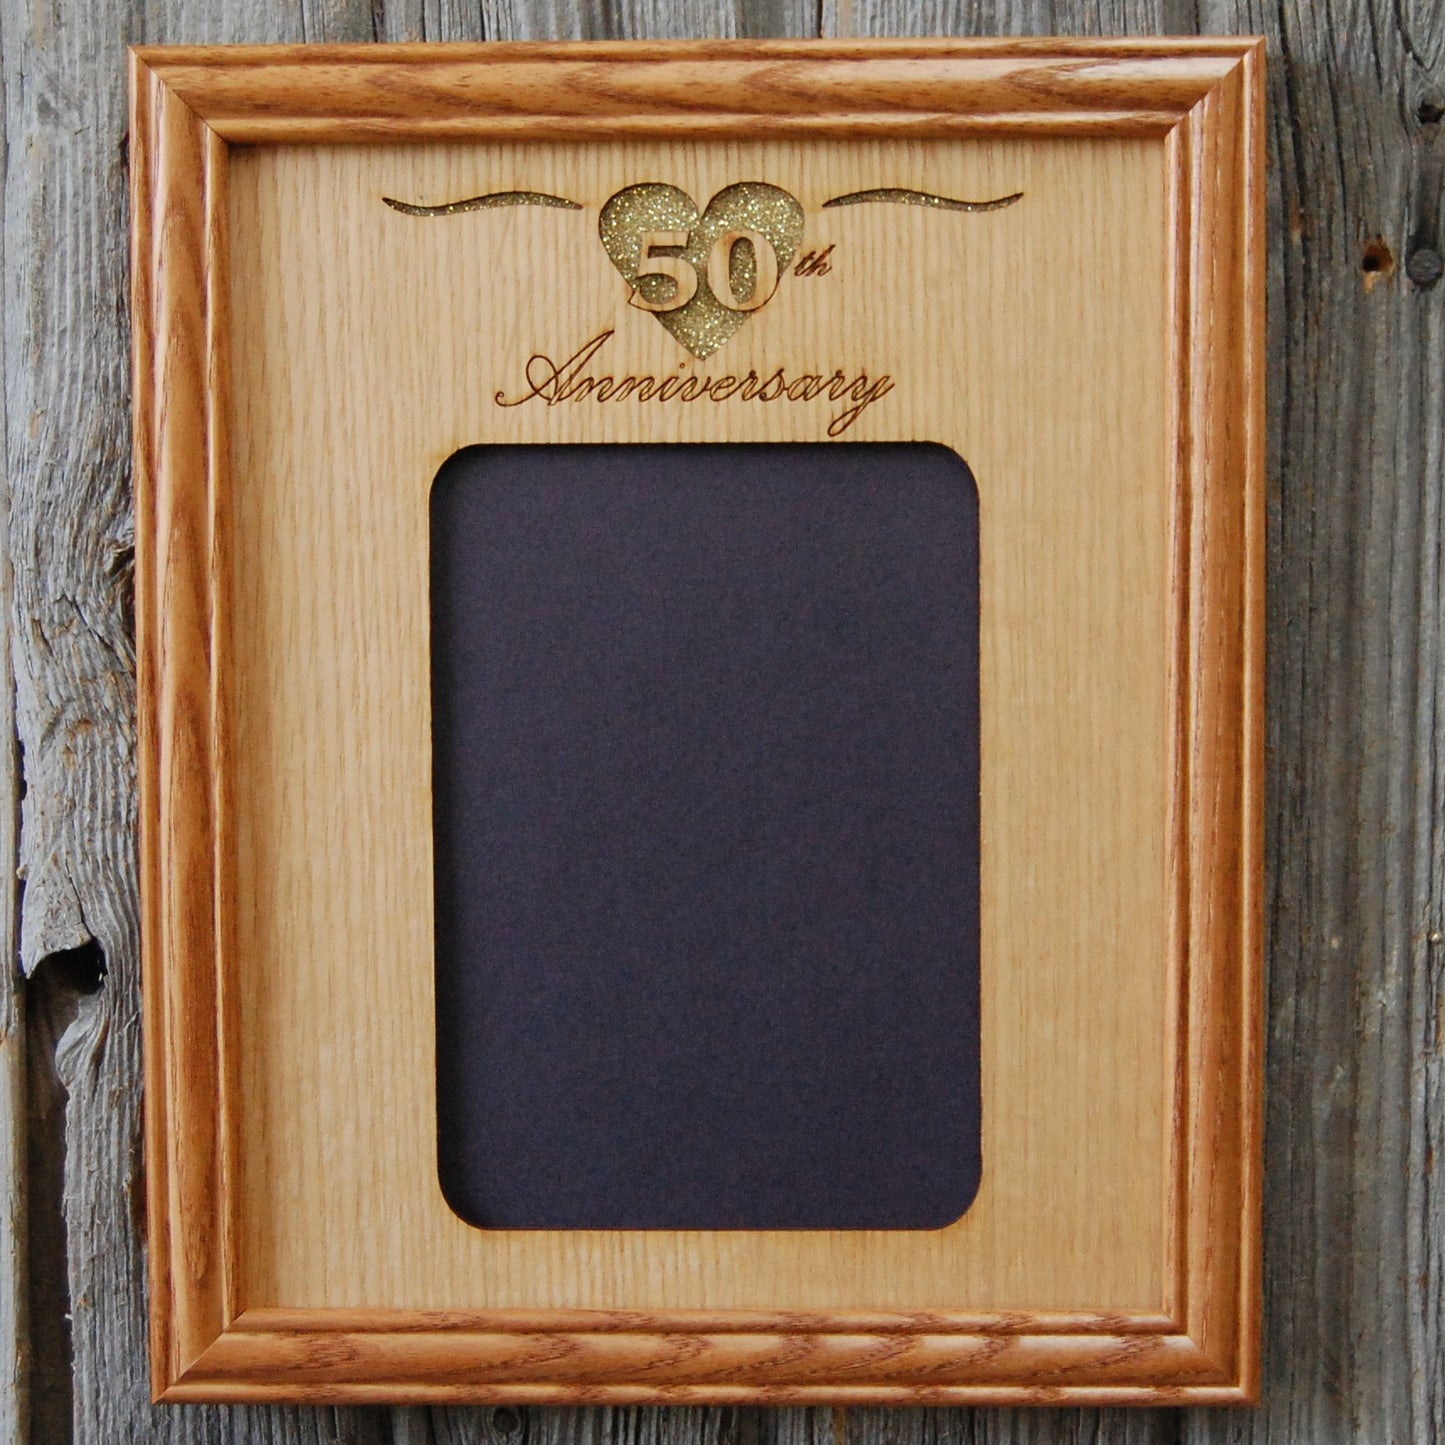 50th Anniversary Picture Frame